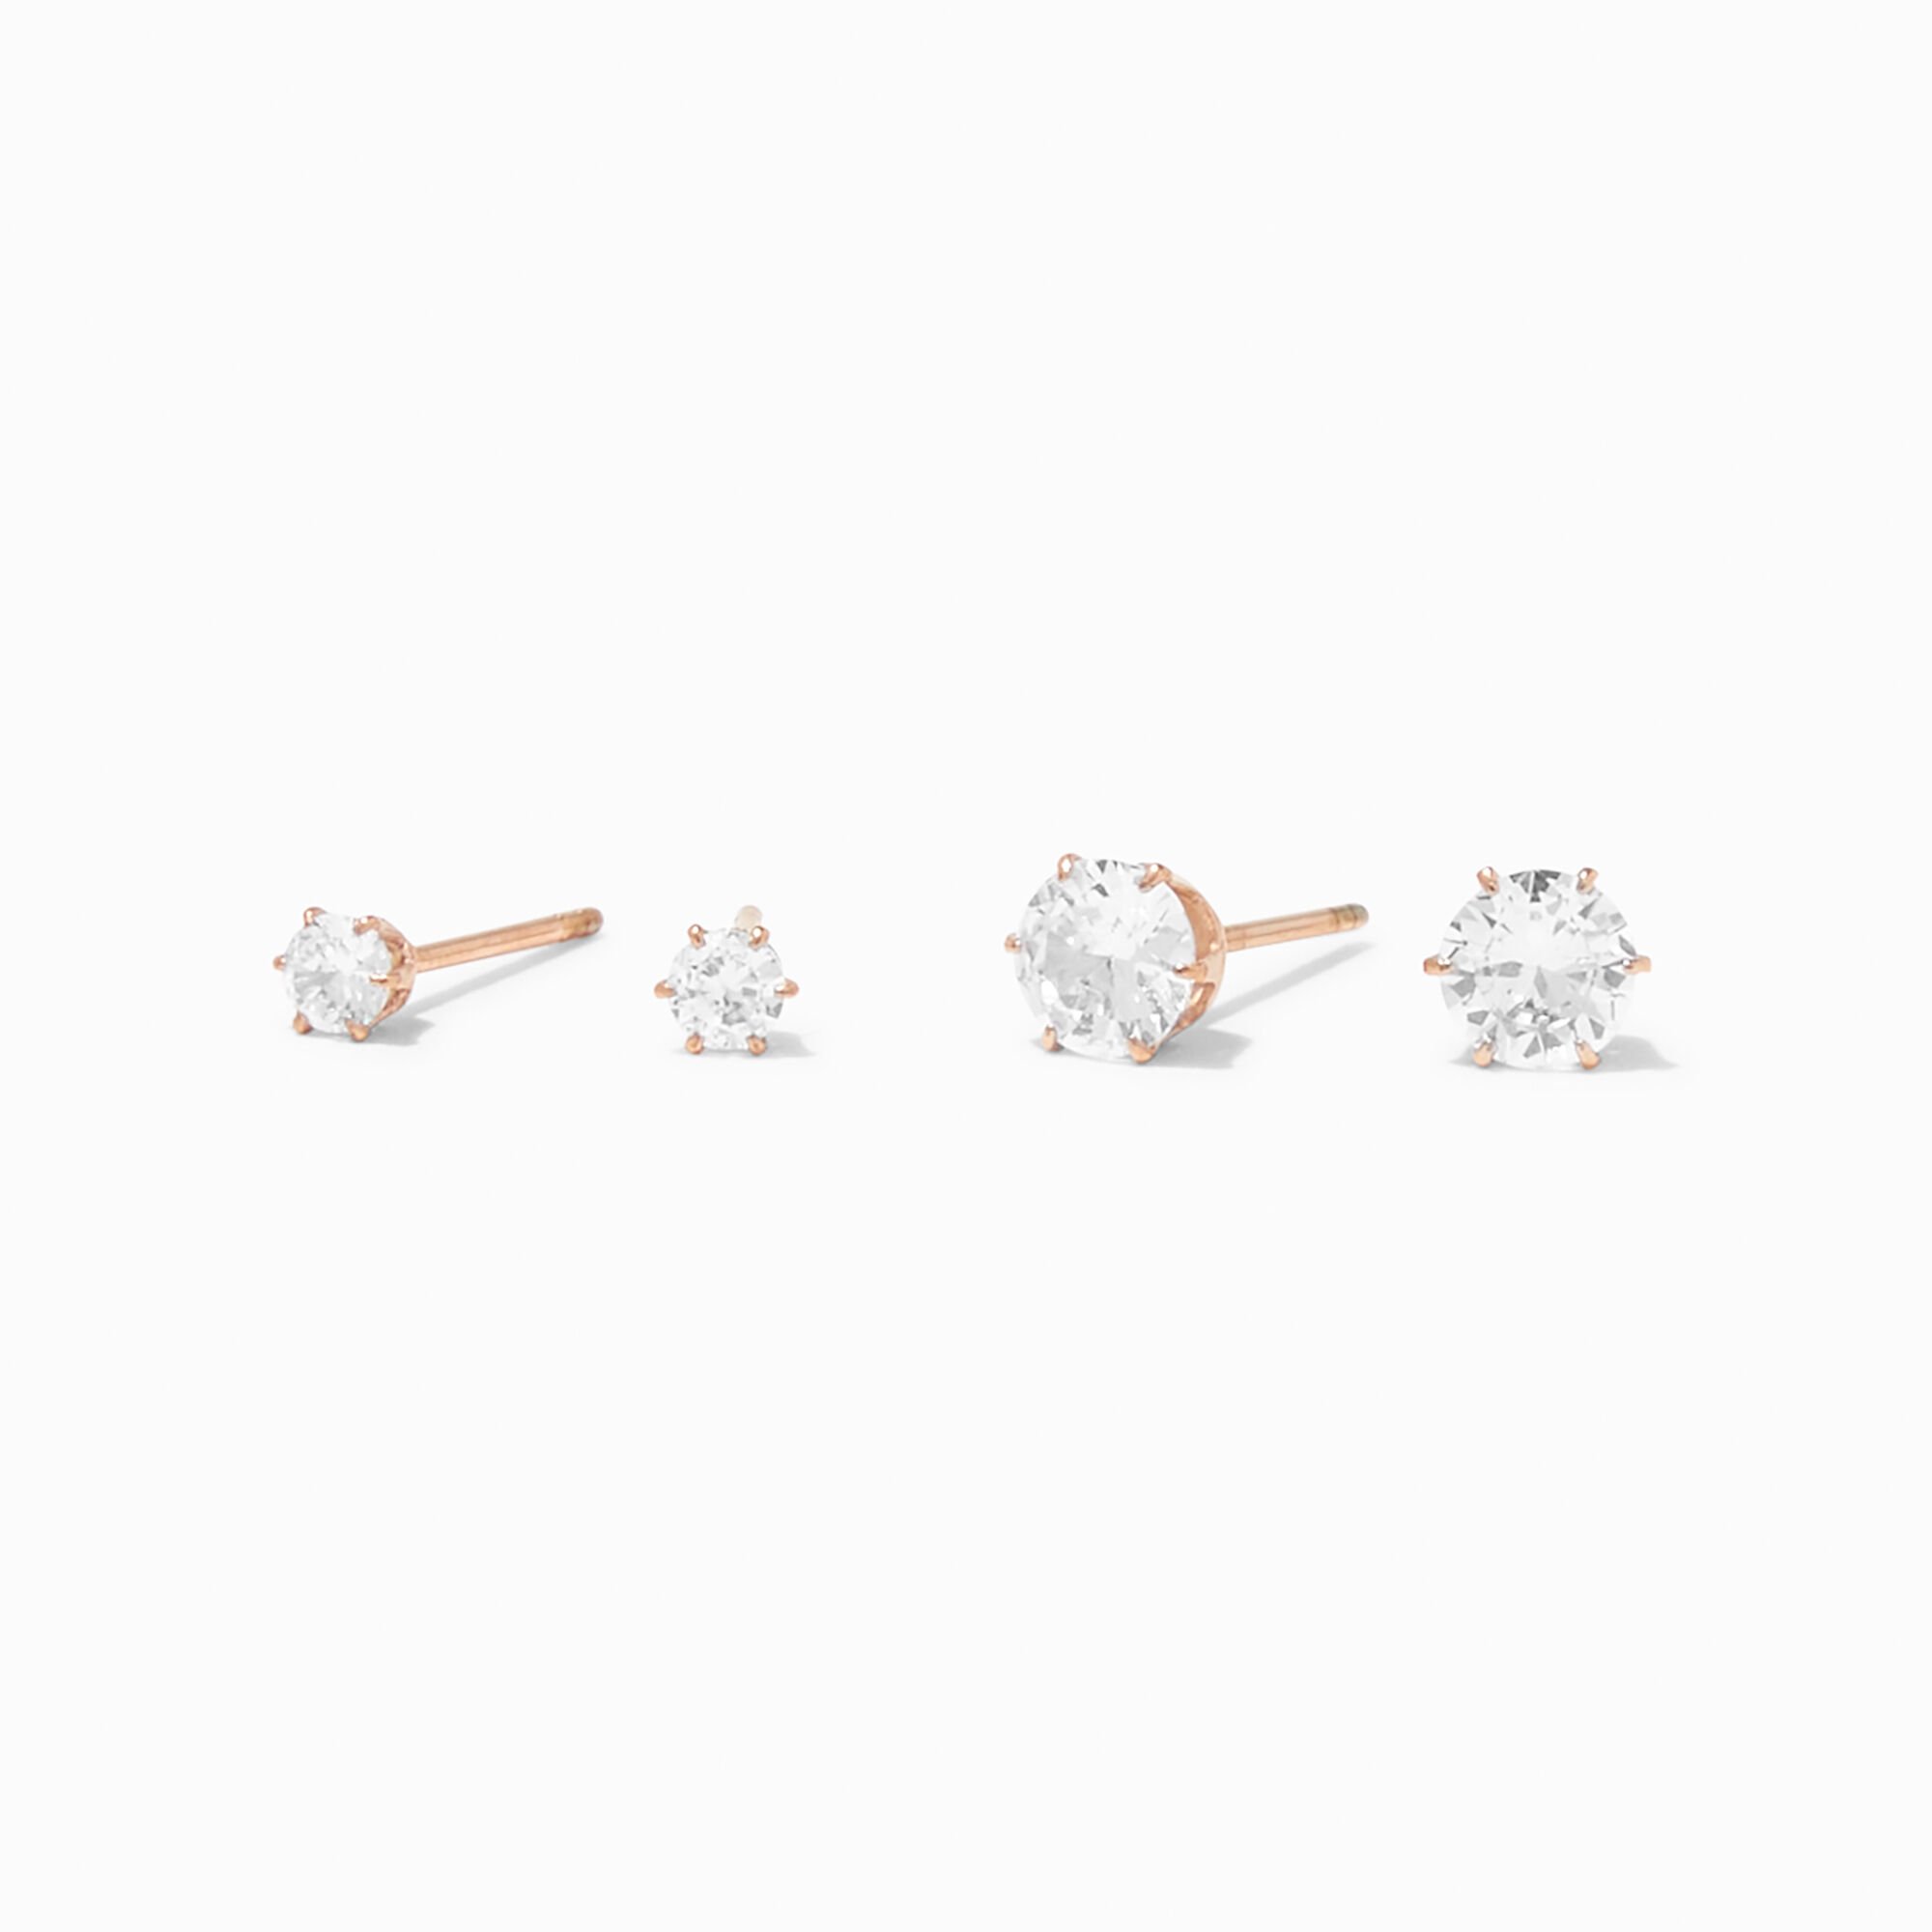 View C Luxe By Claires 18K Rose Plated Cubic Zirconia 3MM 5MM Stud Earrings 2 Pack Gold information